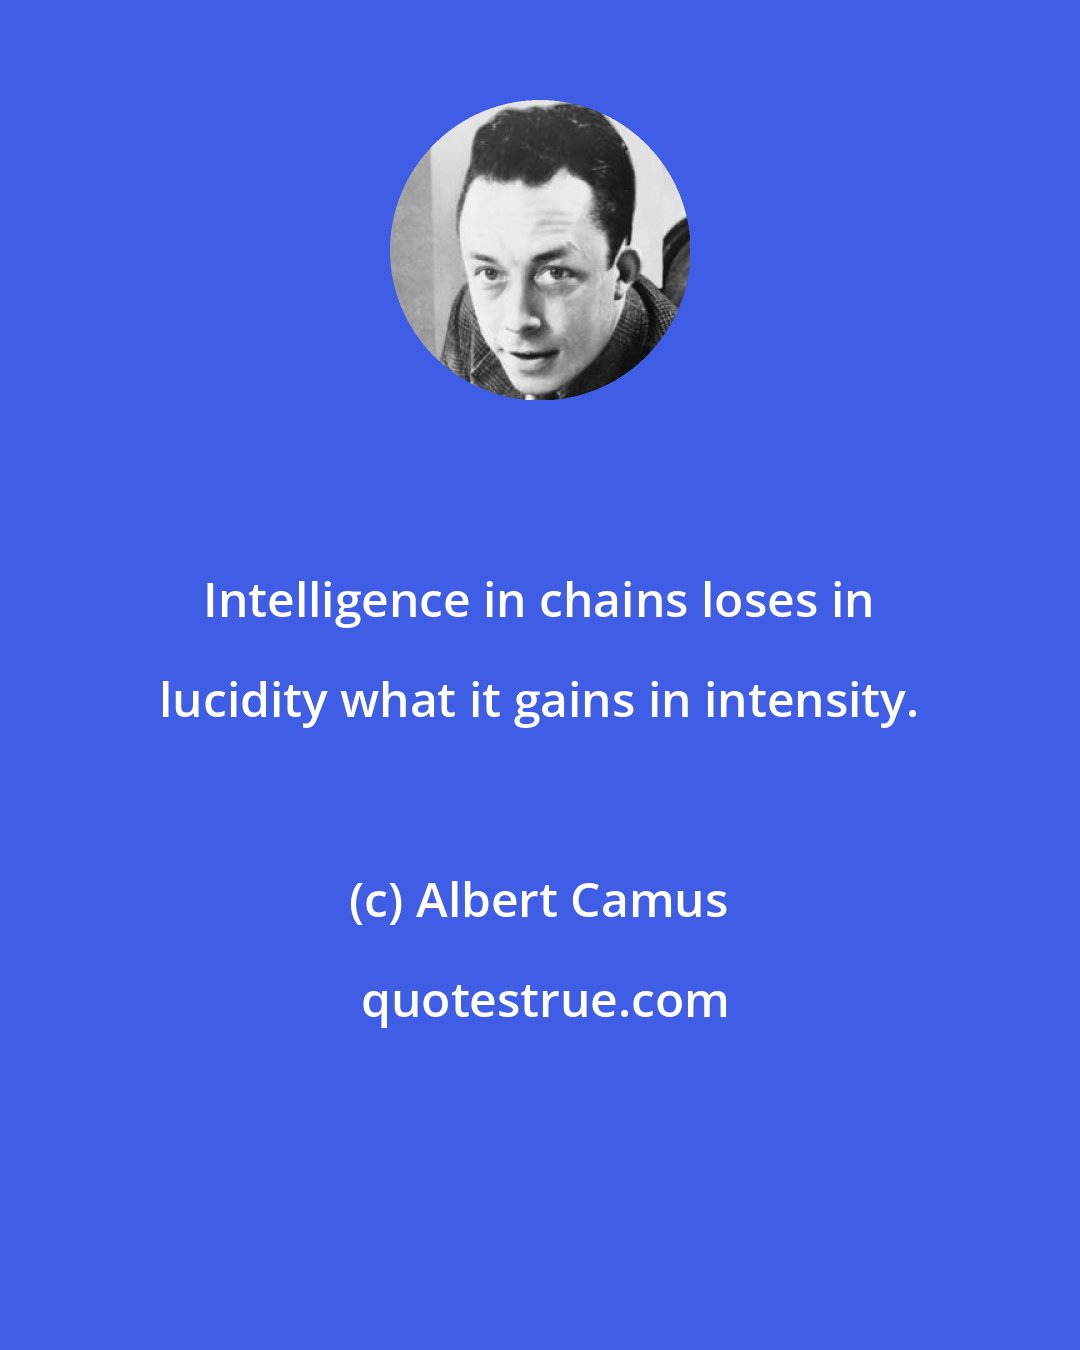 Albert Camus: Intelligence in chains loses in lucidity what it gains in intensity.